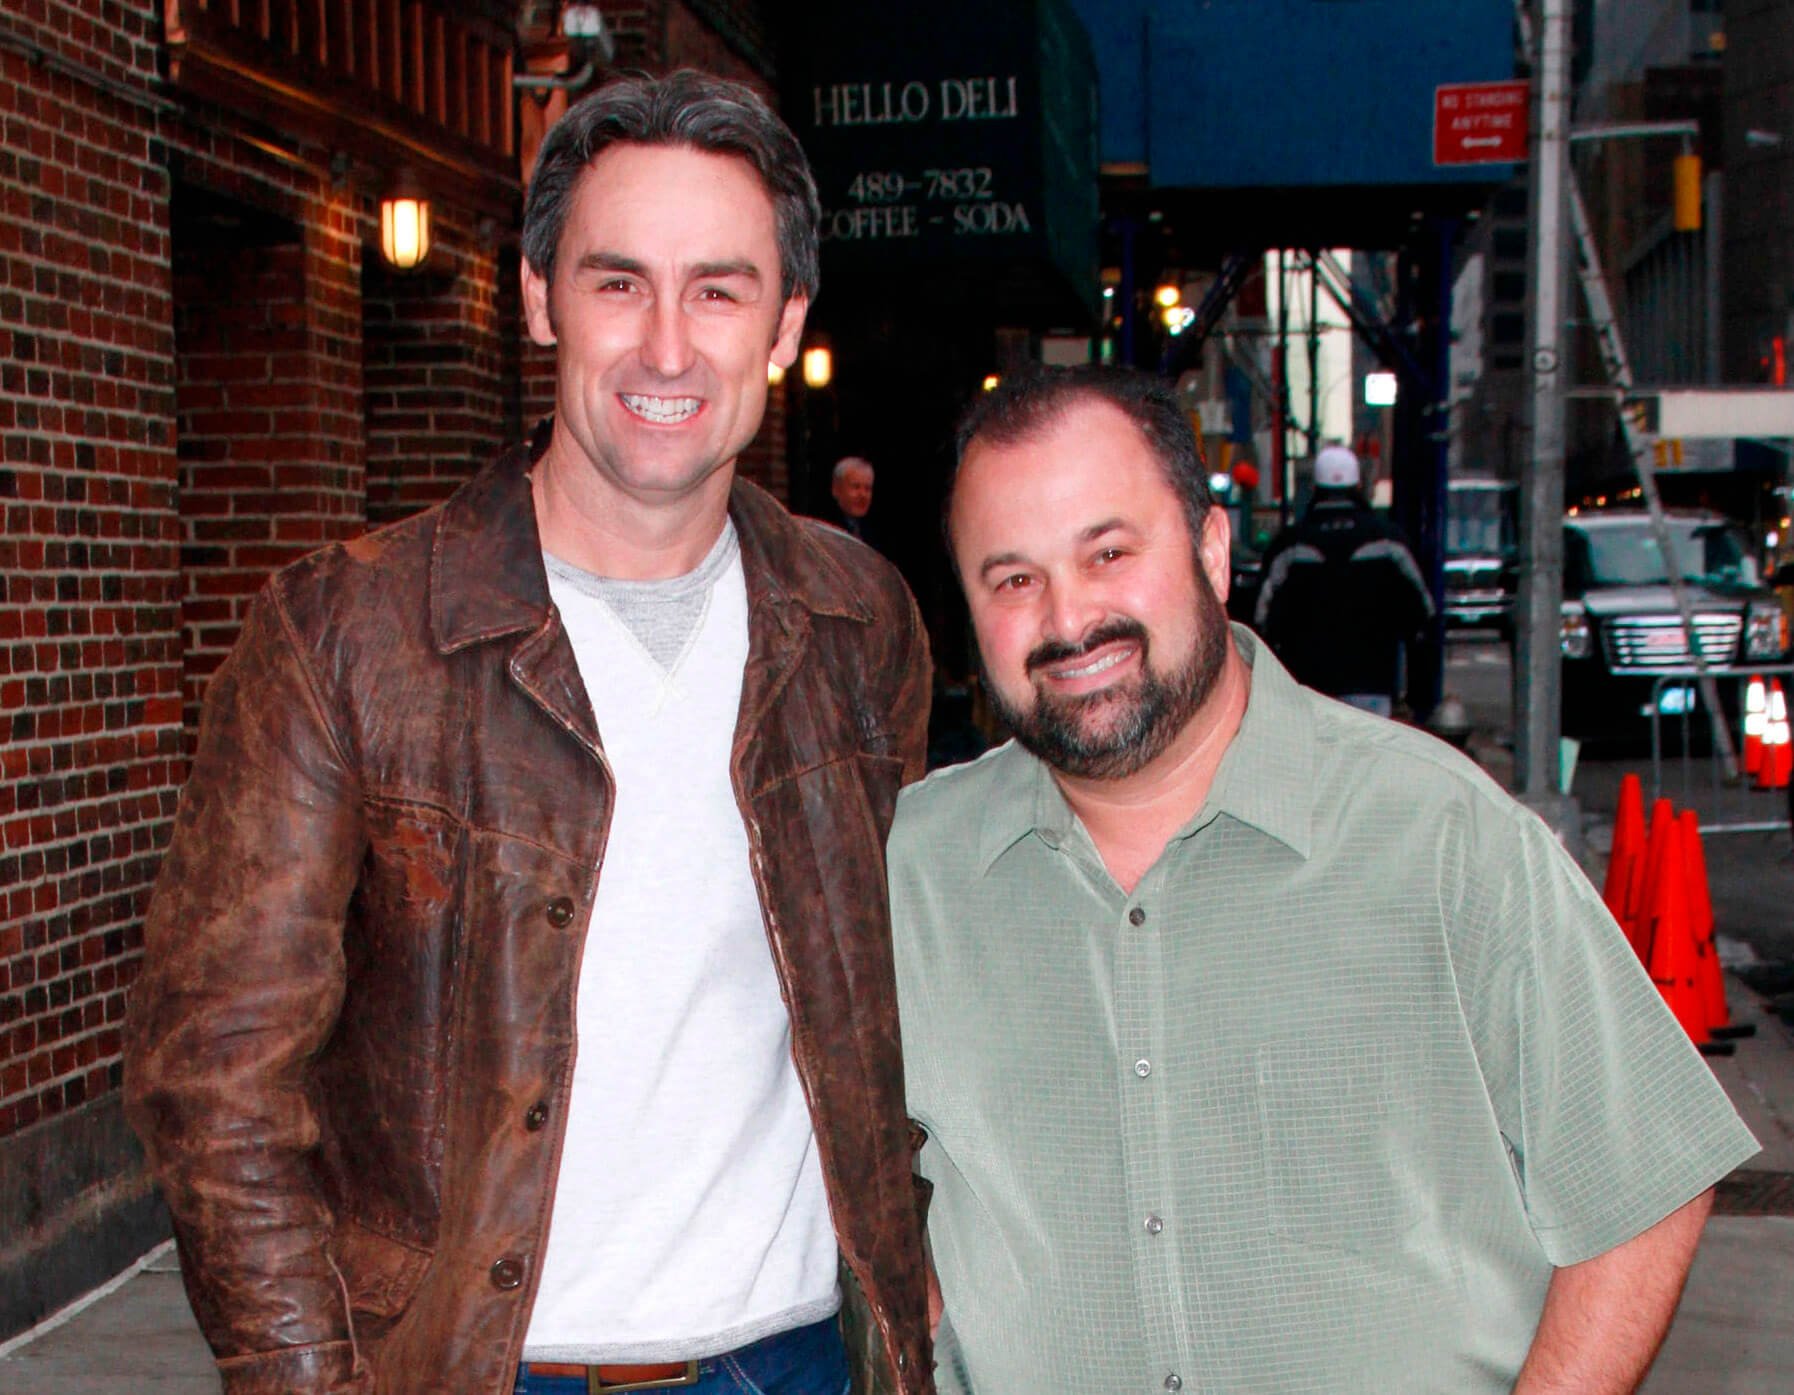 Mike Wolfe and Frank Fritz from 'American Pickers' smiling together